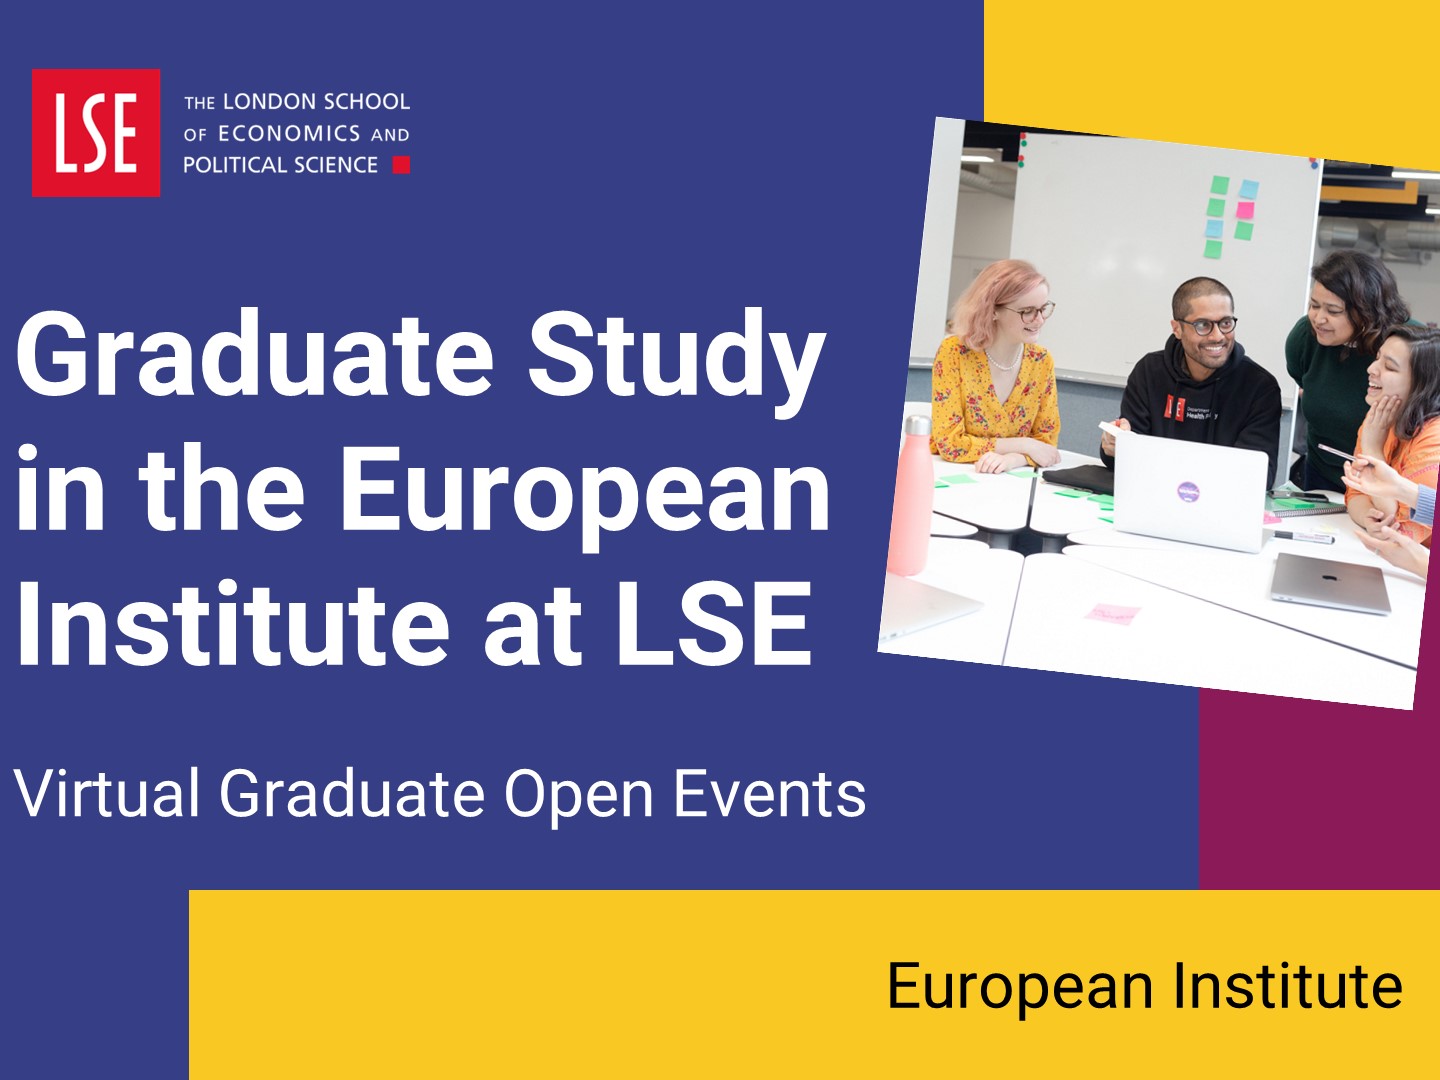 Introduction to graduate study in the European Institute at LSE